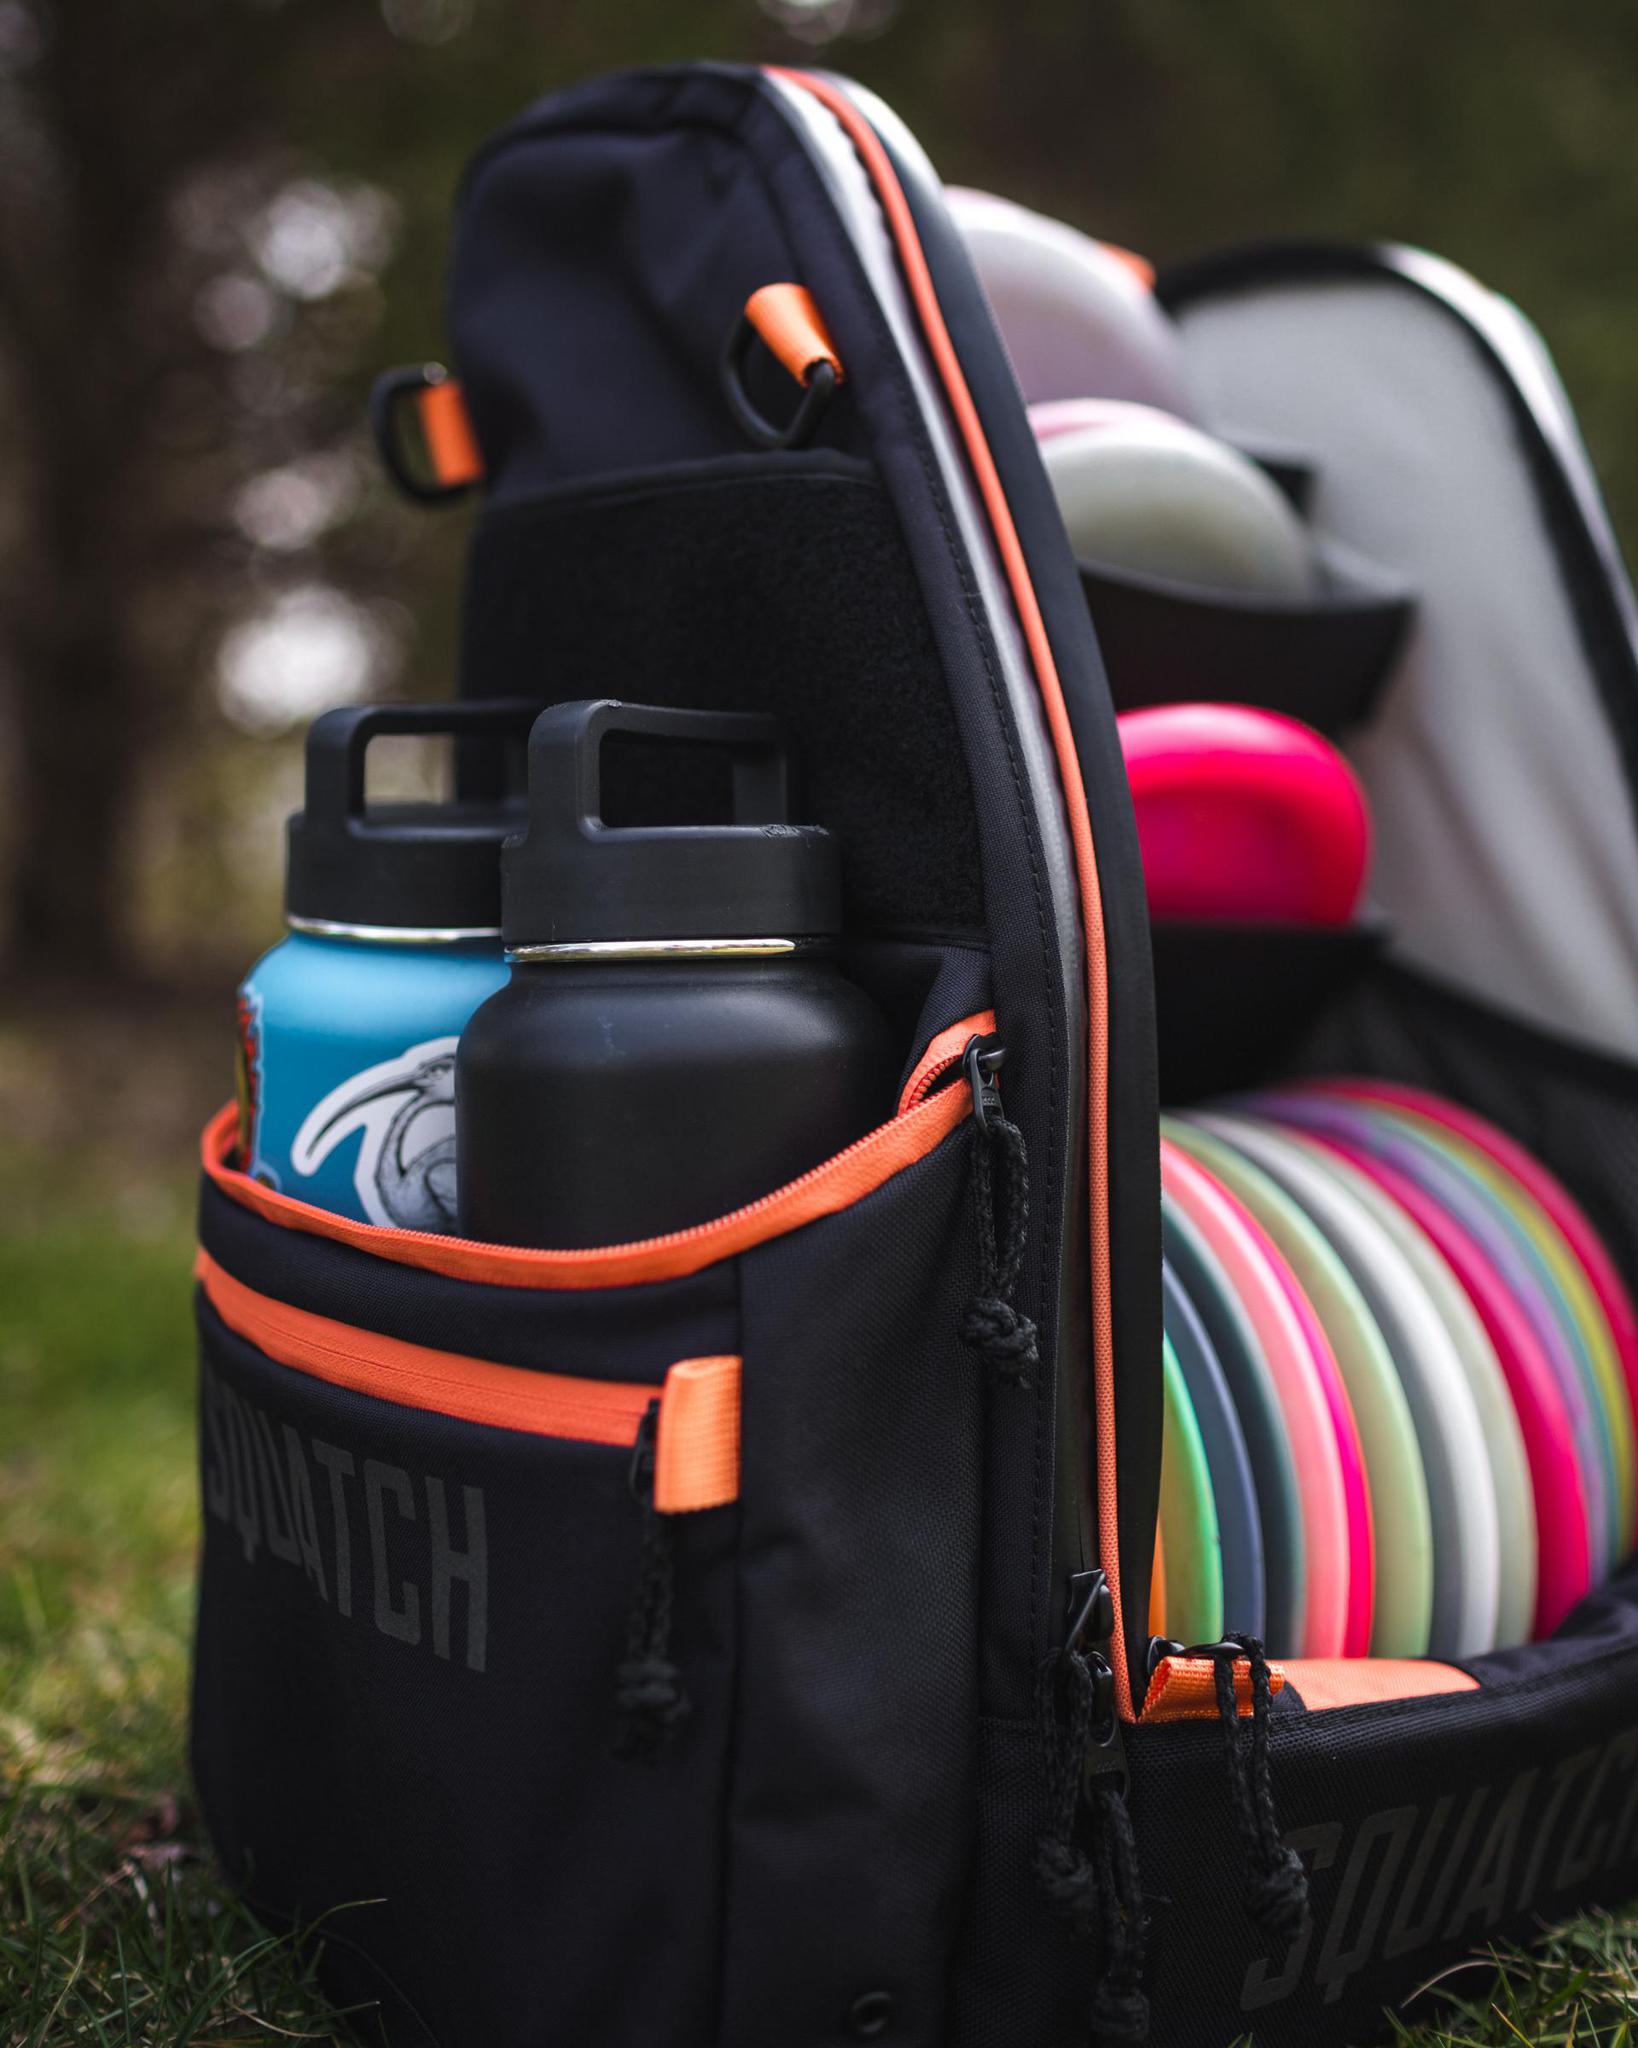 Squatch The Link Bag w/ Cooler Disc Golf Bag charcoal-salmon side view with 2 canteens in side pocket